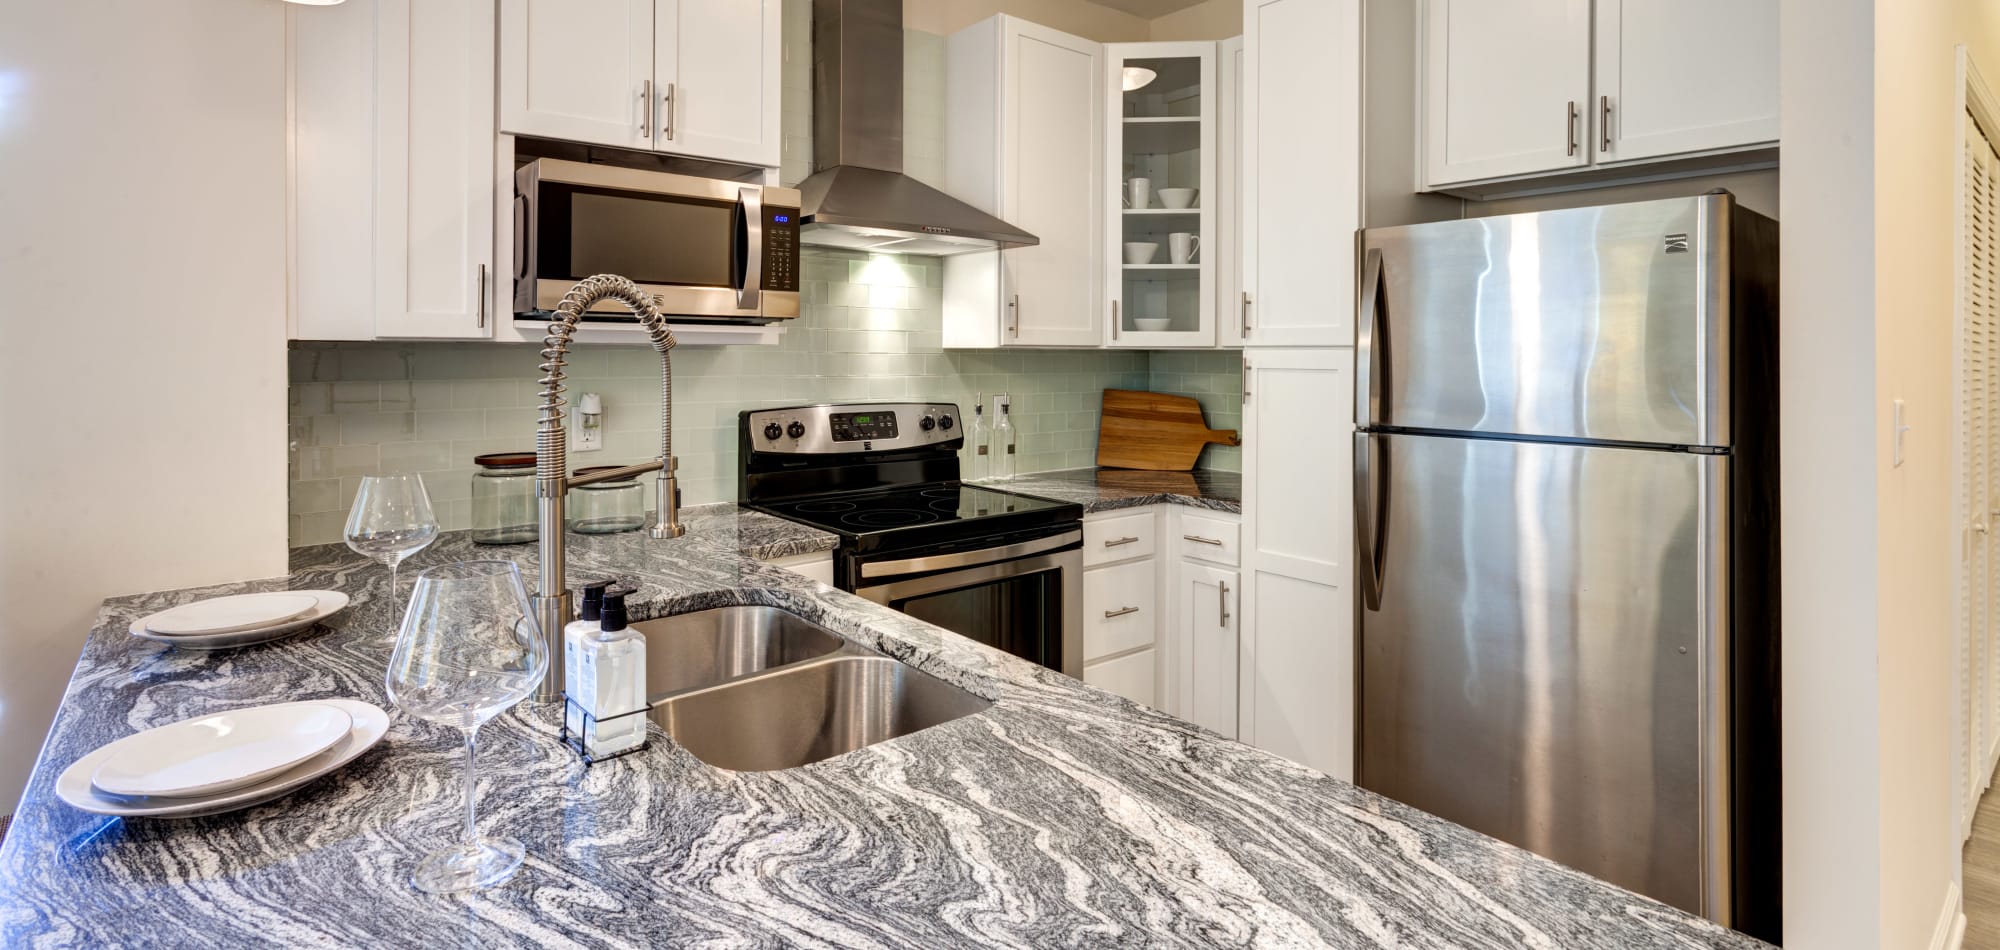 Kitchen with stainless-steel appliances at East Beach Marina, Norfolk, Virginia